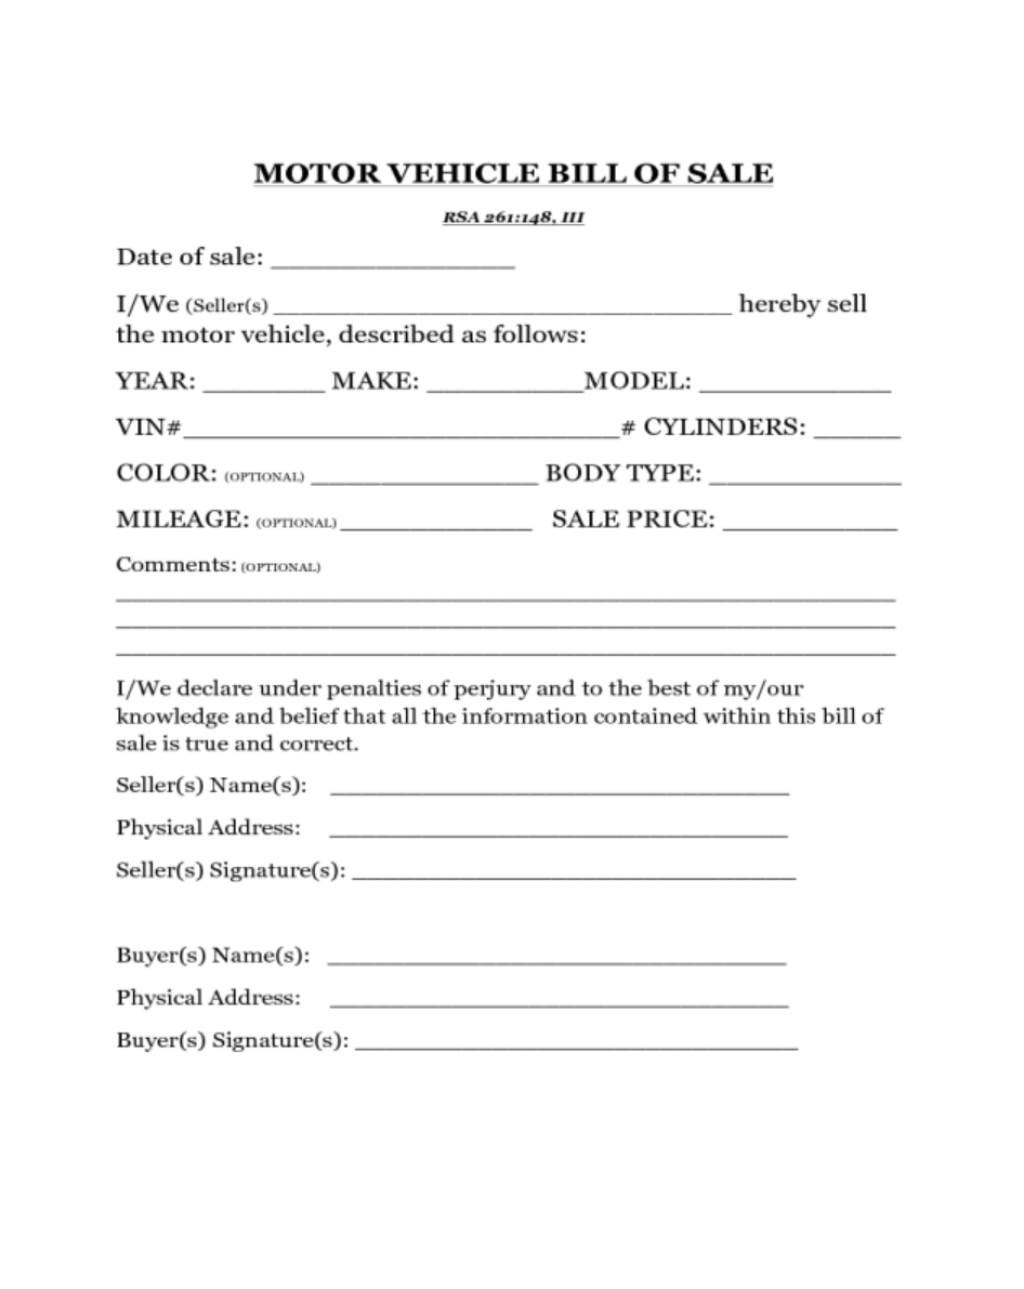 Picture of: Get New Hampshire Auto Bill of Sale Form  UsedAutoBillofSale